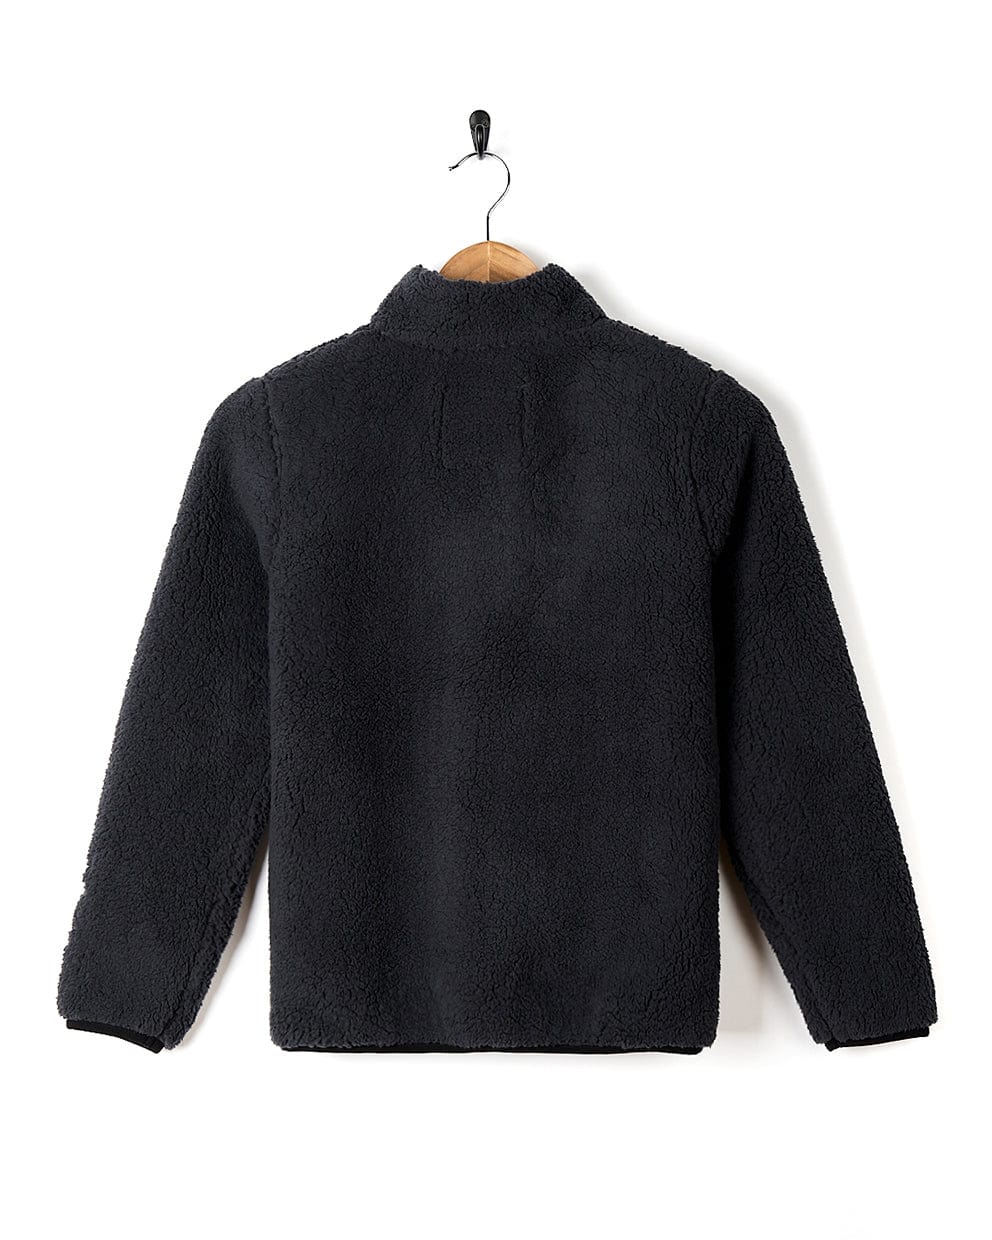 A Saltrock Sherpa Fleece jacket with front zip pockets hanging on a hanger.